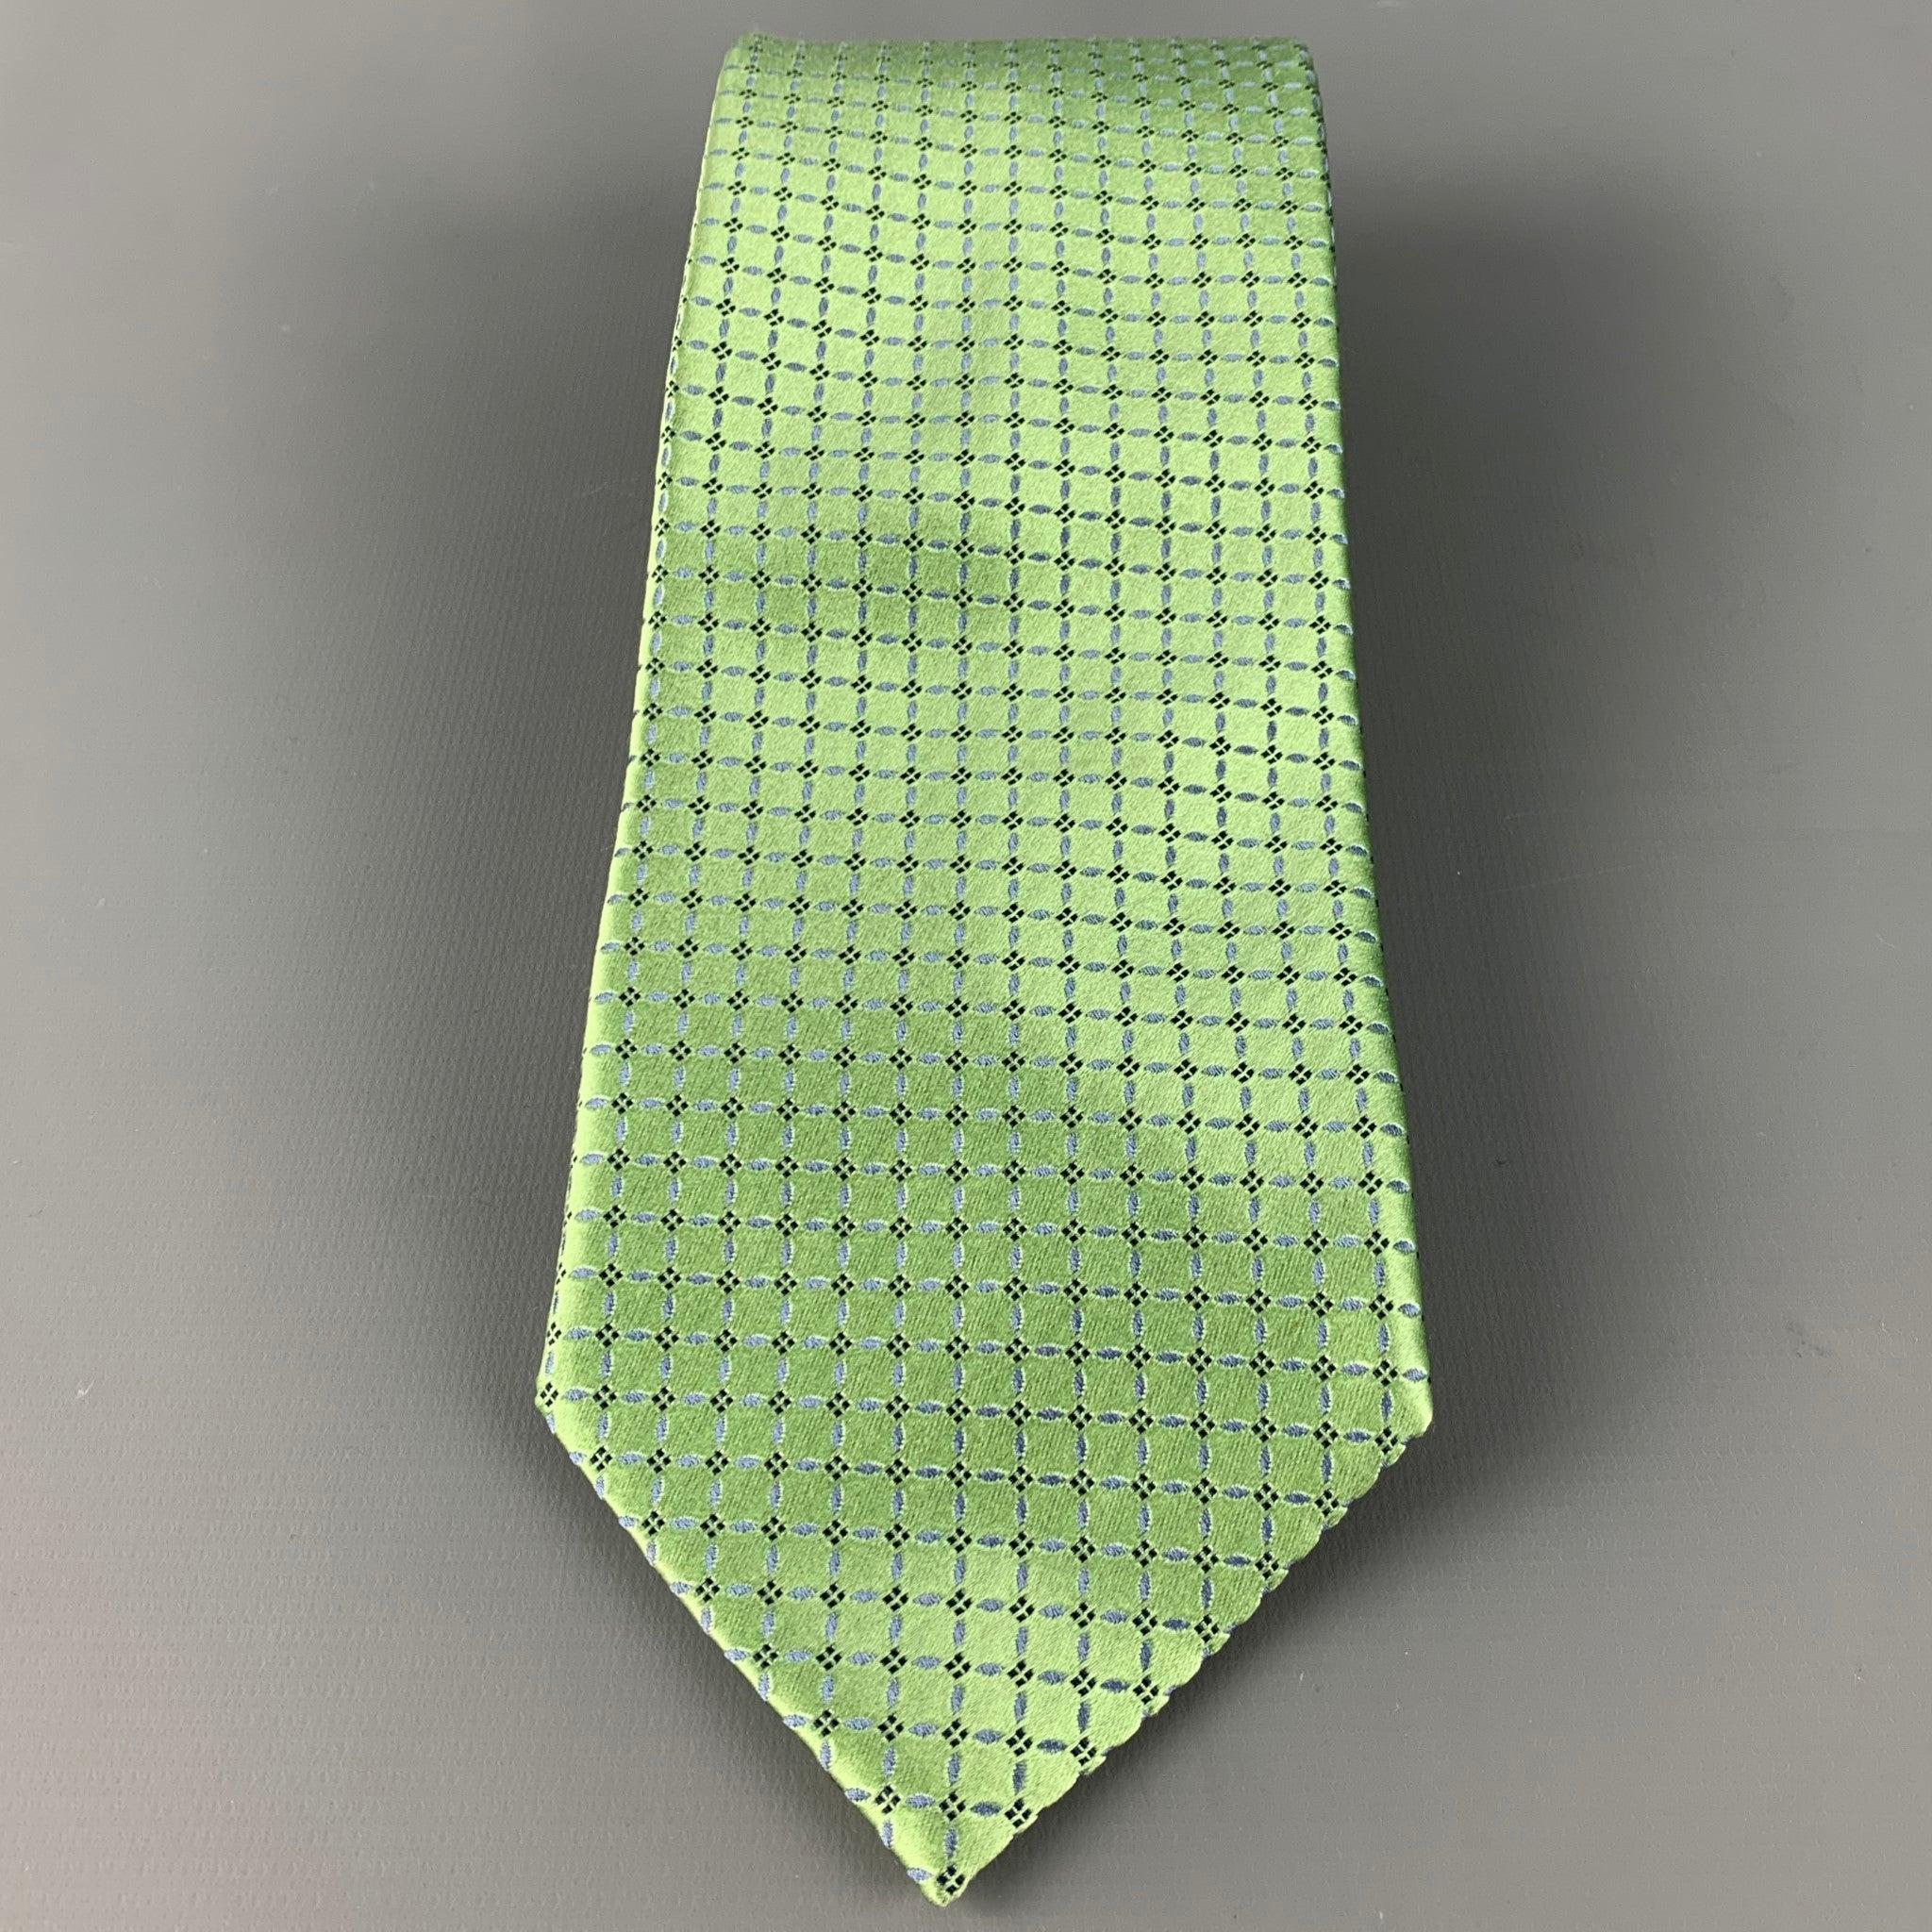 ERMENEGILDO ZEGNA
tie in a green silk satin, featuring a light blue squares pattern. Made in Italy.Very Good Pre-Owned Condition. 

Measurements: 
  Width: 3.5 inches Length: 60 inches 
  
  
 
Reference: 126572
Category: Tie
More Details
   